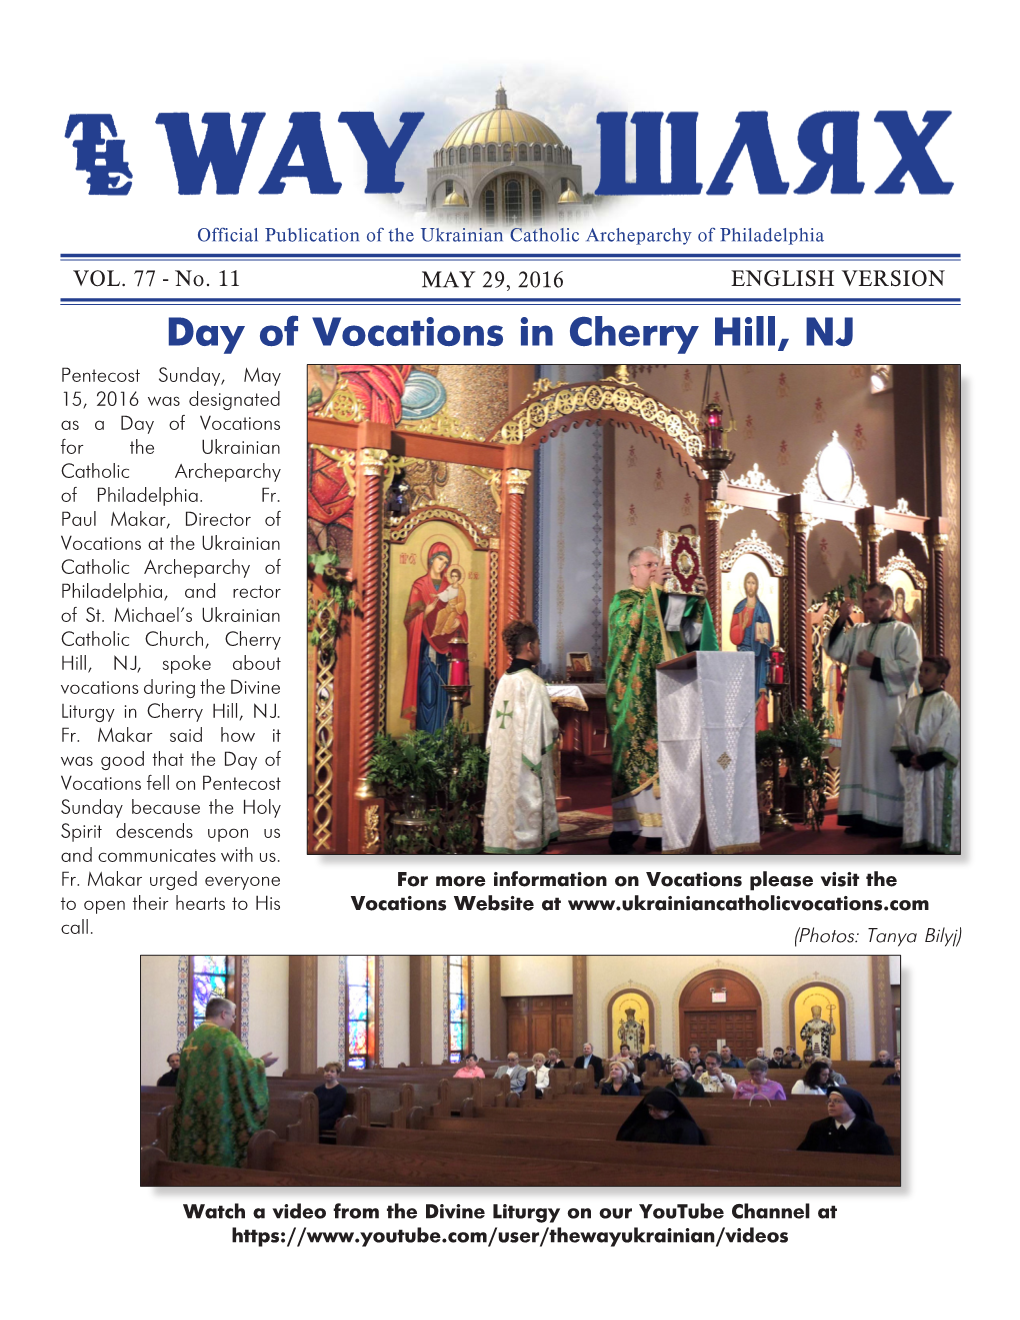 Day of Vocations in Cherry Hill, NJ Pentecost Sunday, May 15, 2016 Was Designated As a Day of Vocations for the Ukrainian Catholic Archeparchy of Philadelphia